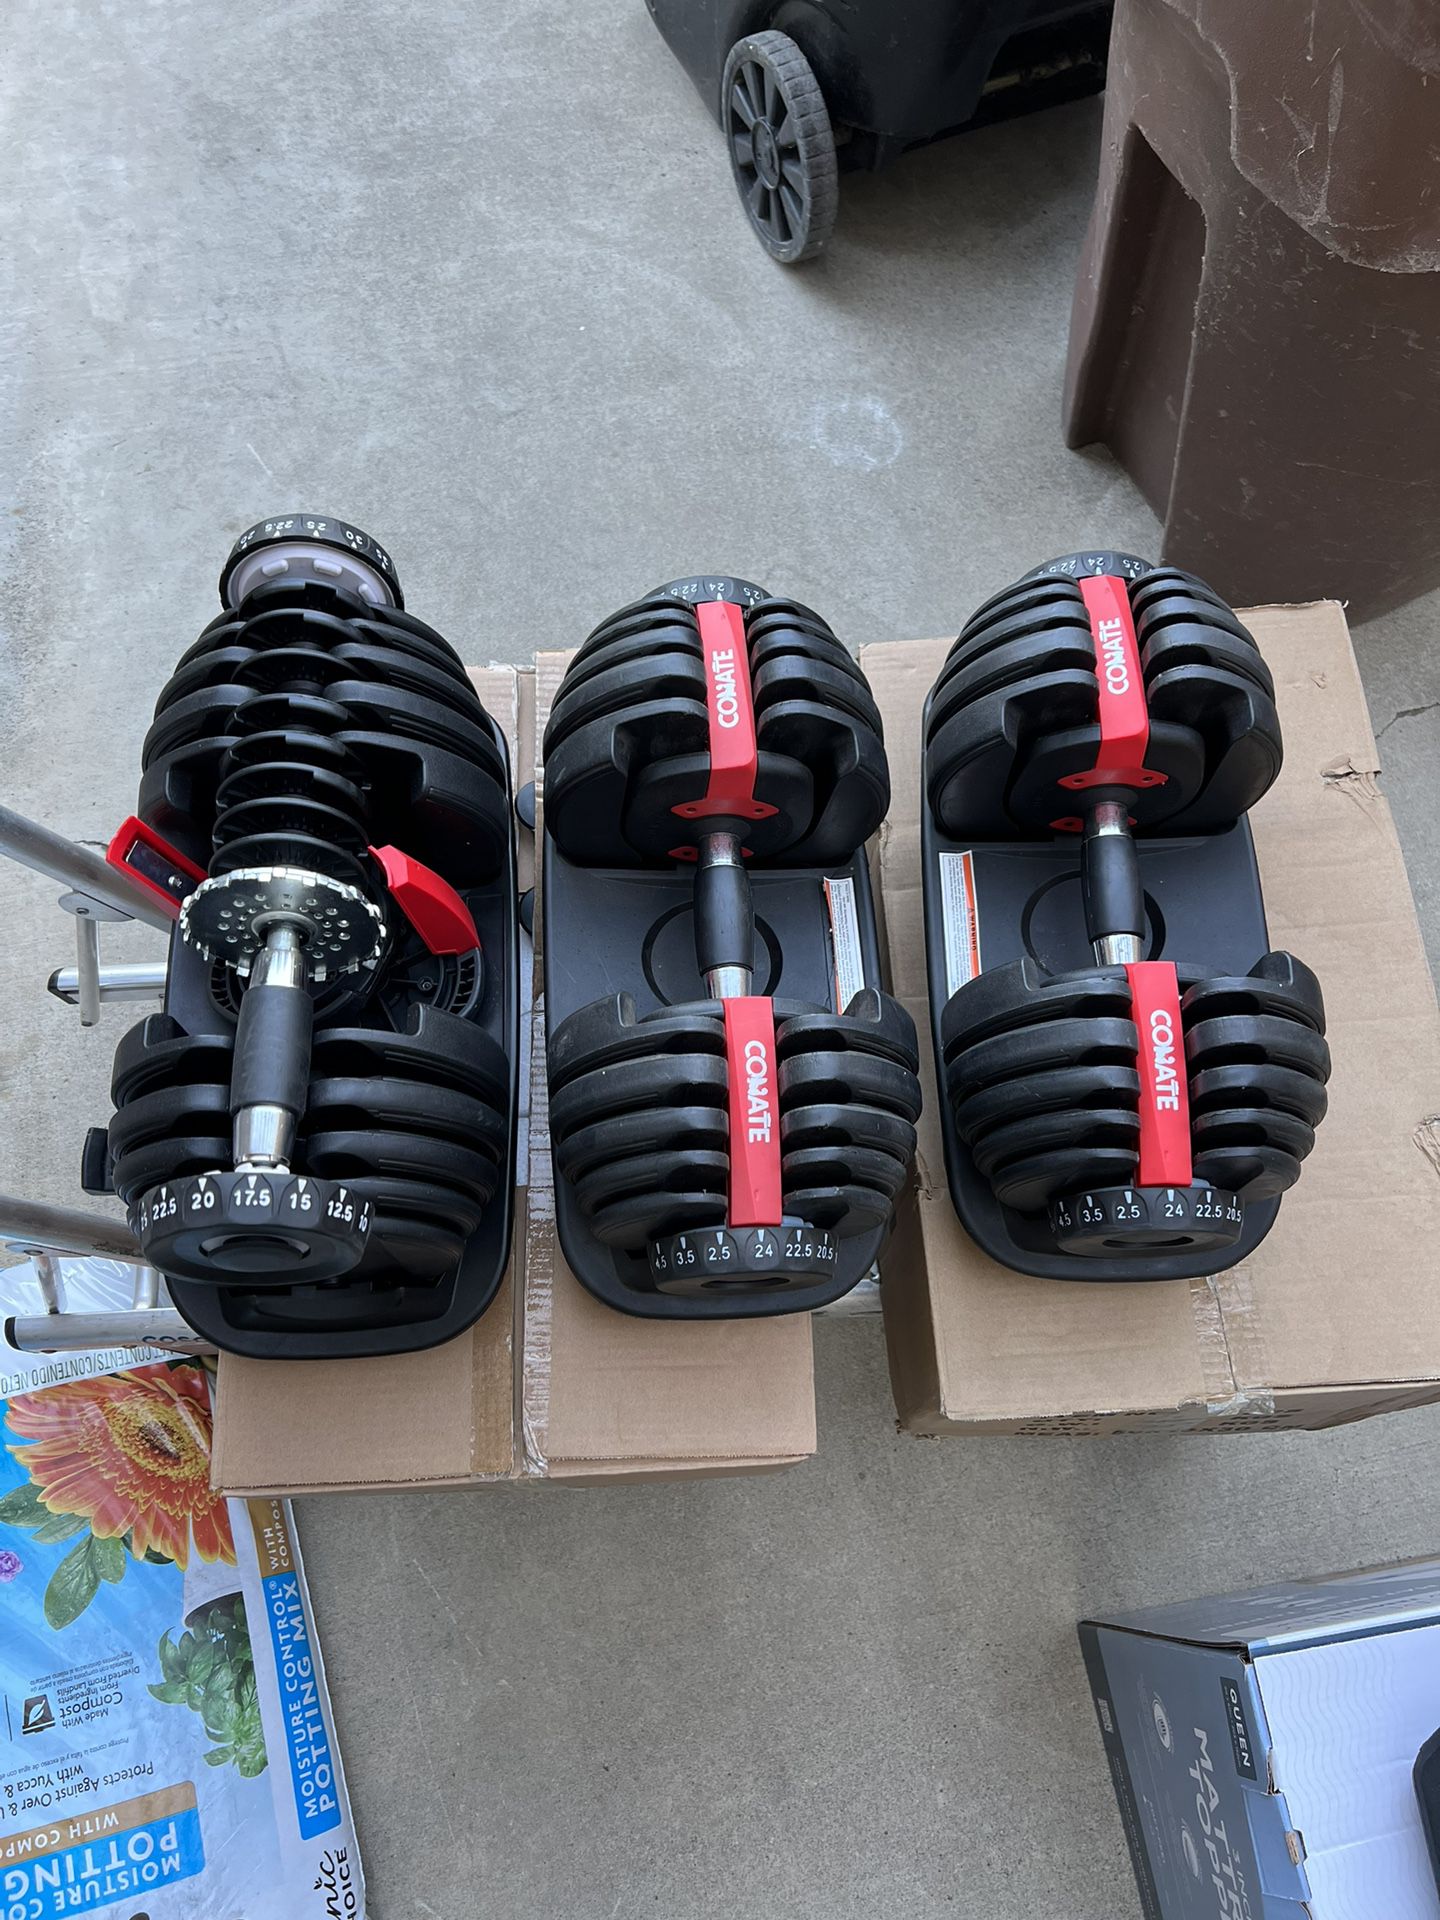 Damaged Adjustable Dumbbells - Price Is For Each Dumbbell - Click On My Profile For More Gym Equipment 